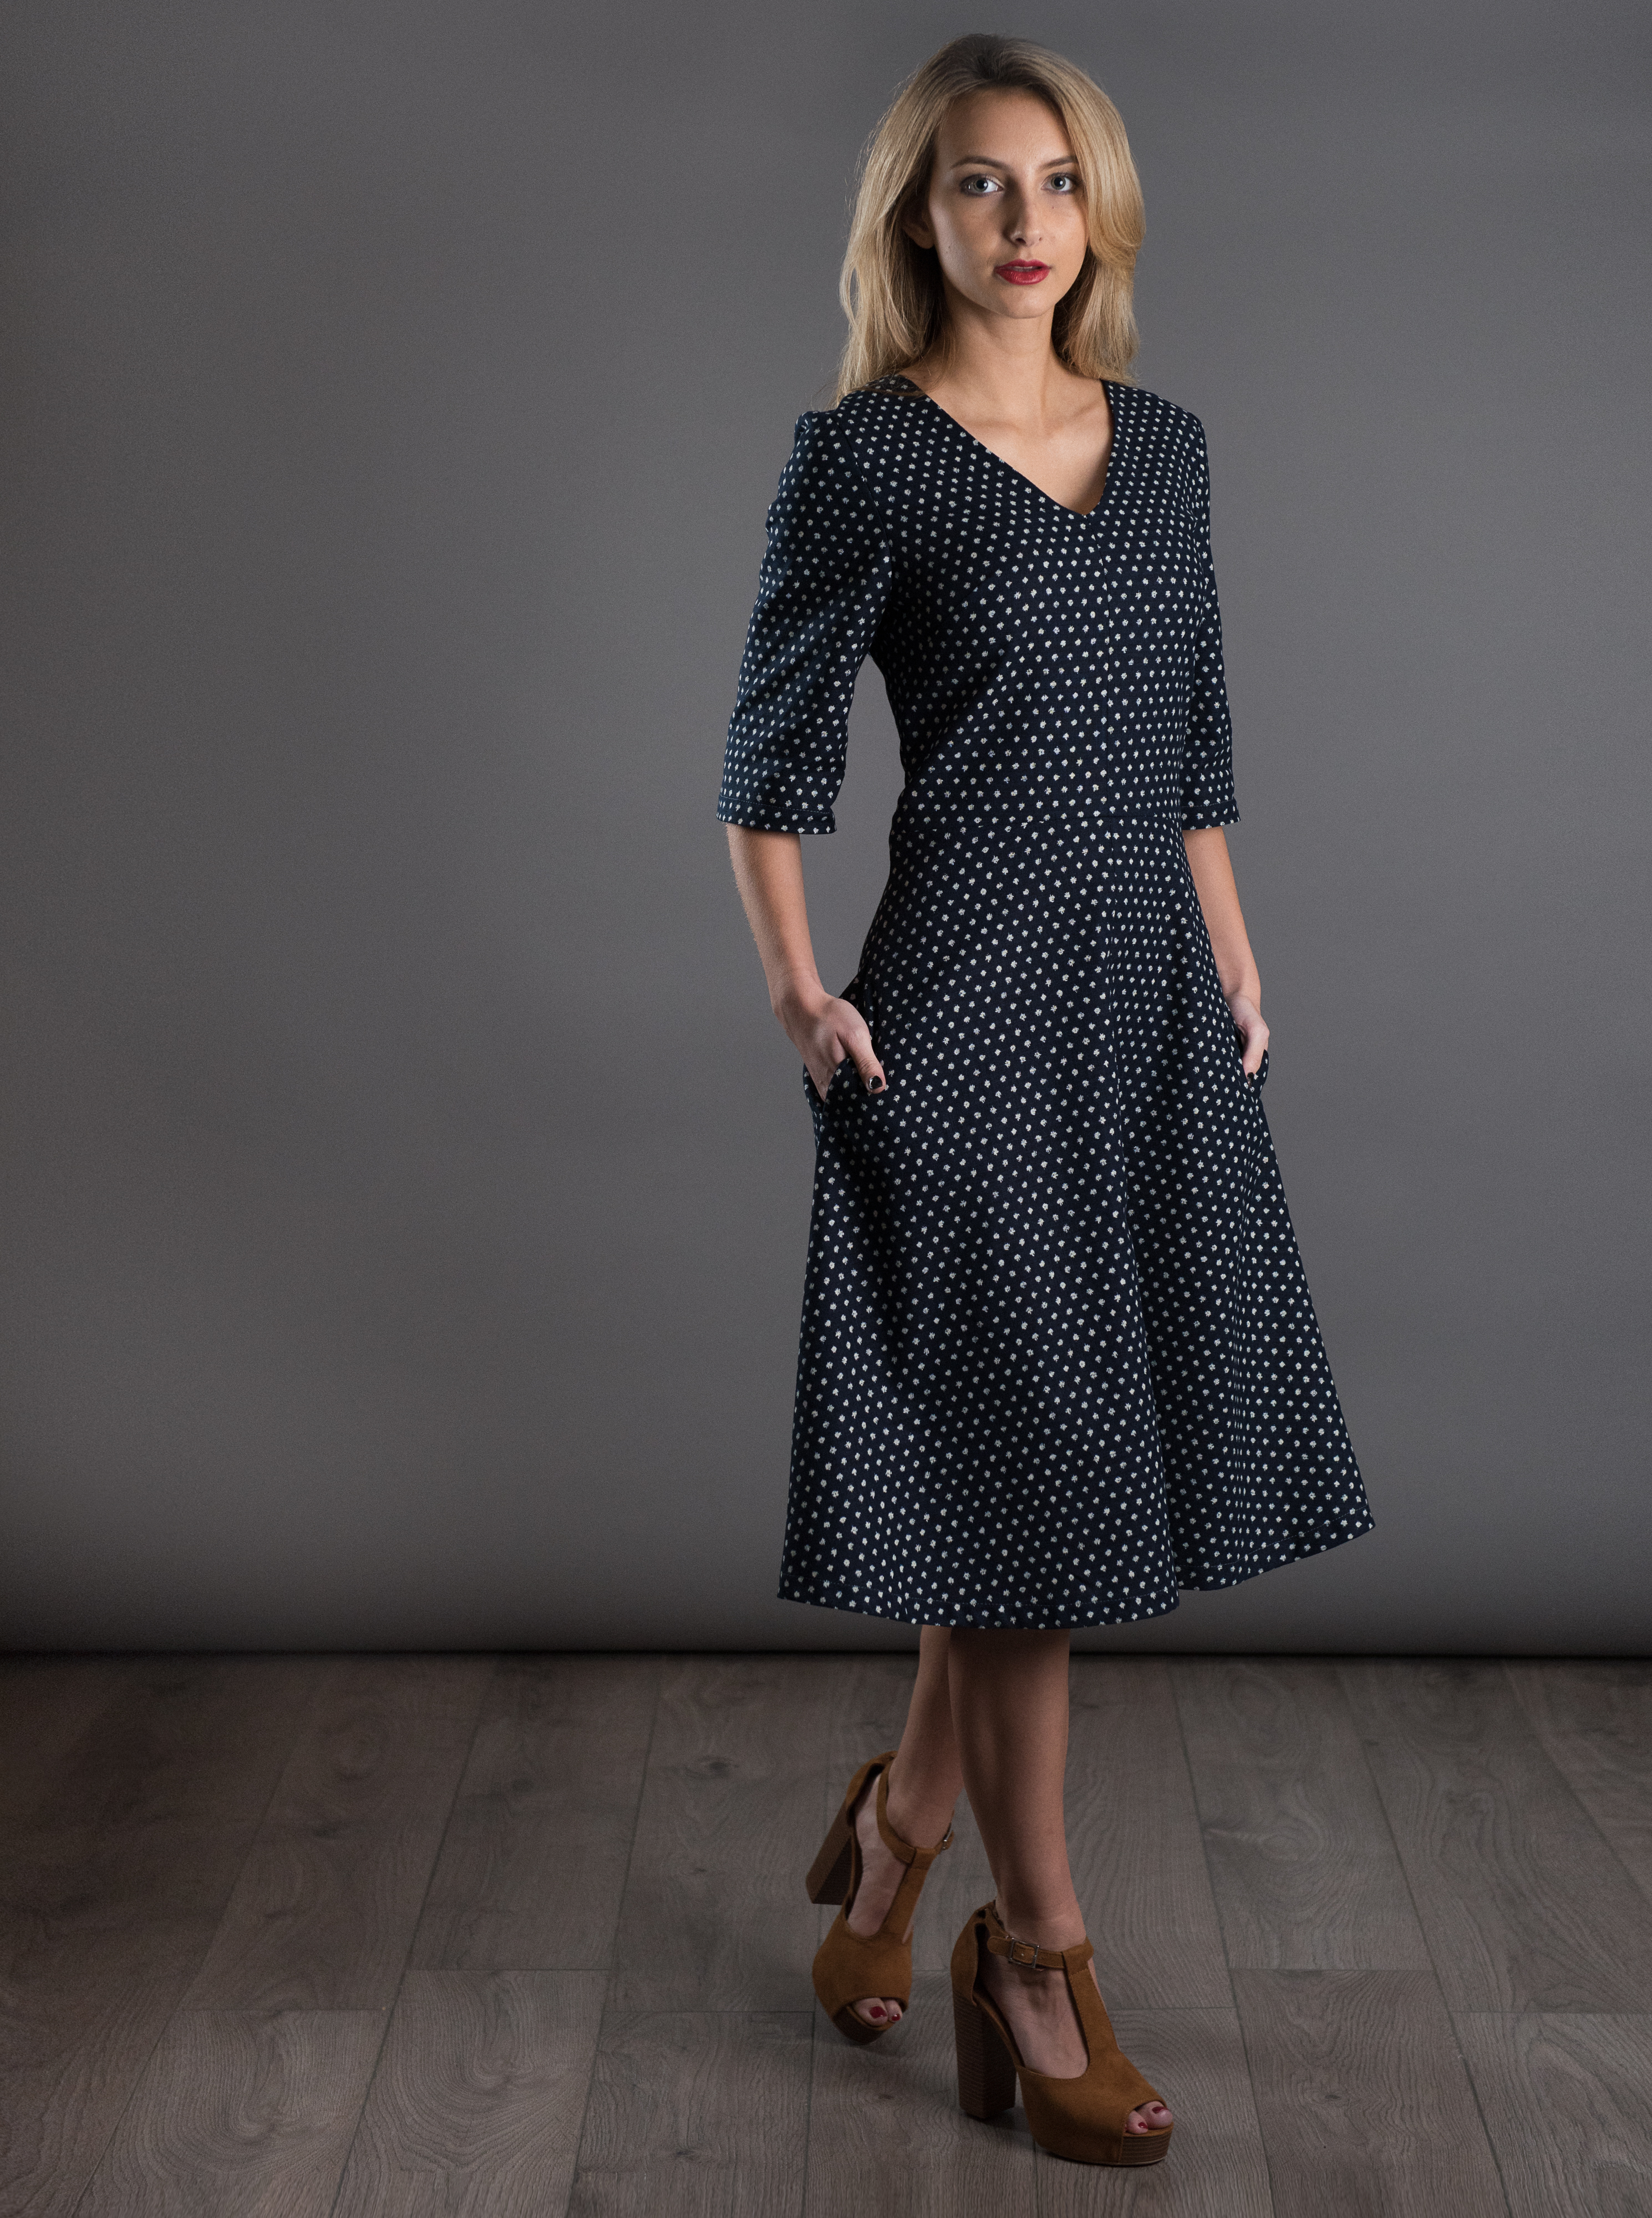 simple a line frock